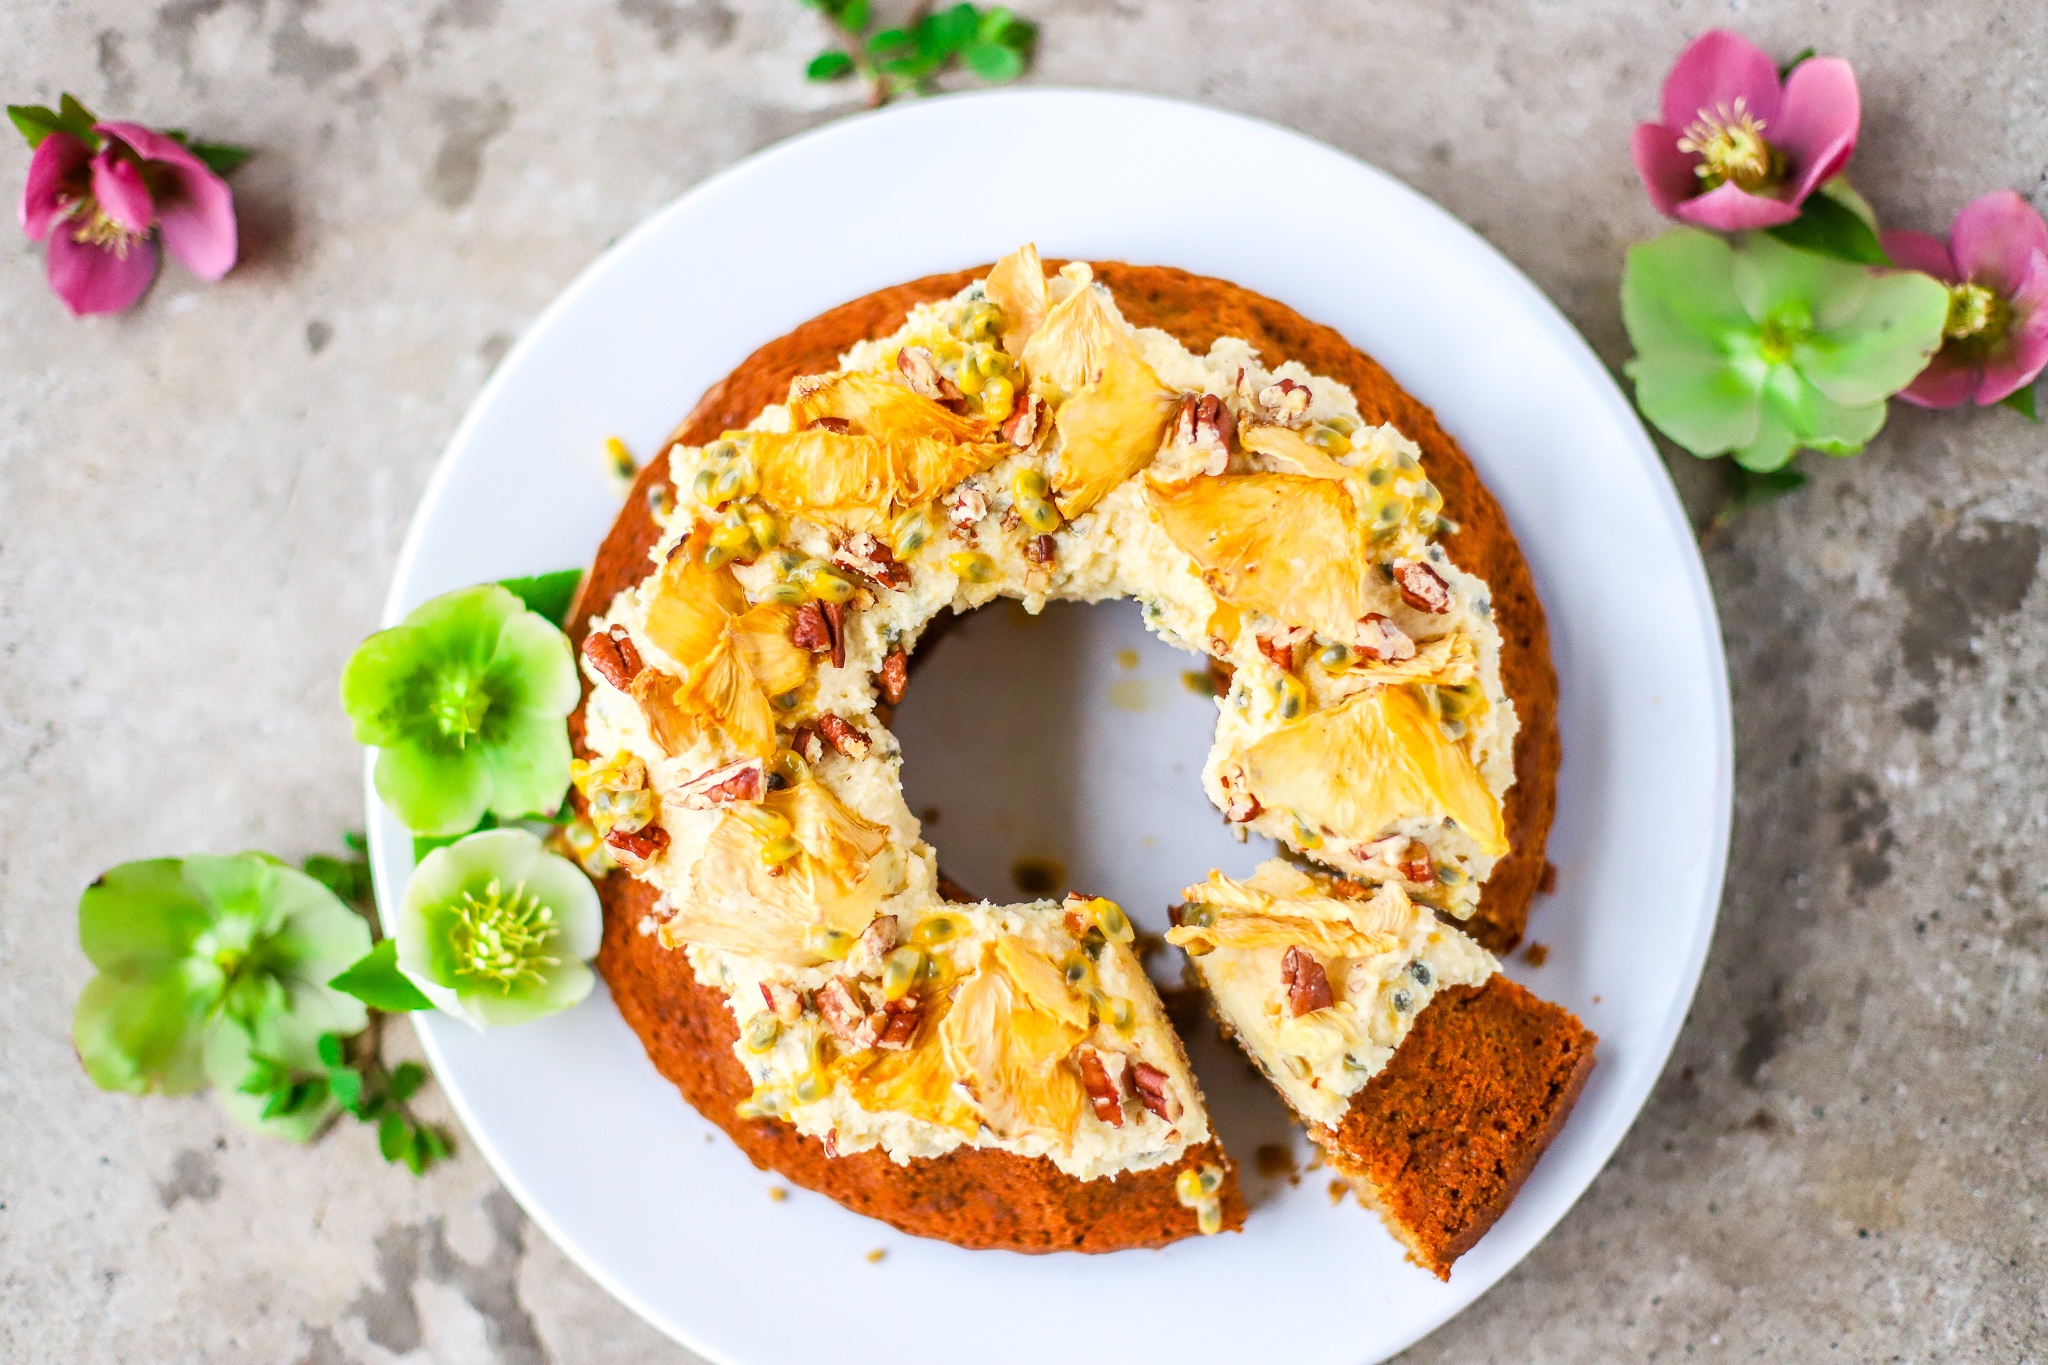 overhead view of decorated hummingbird cake with one slice cut and on white plate with green flowers